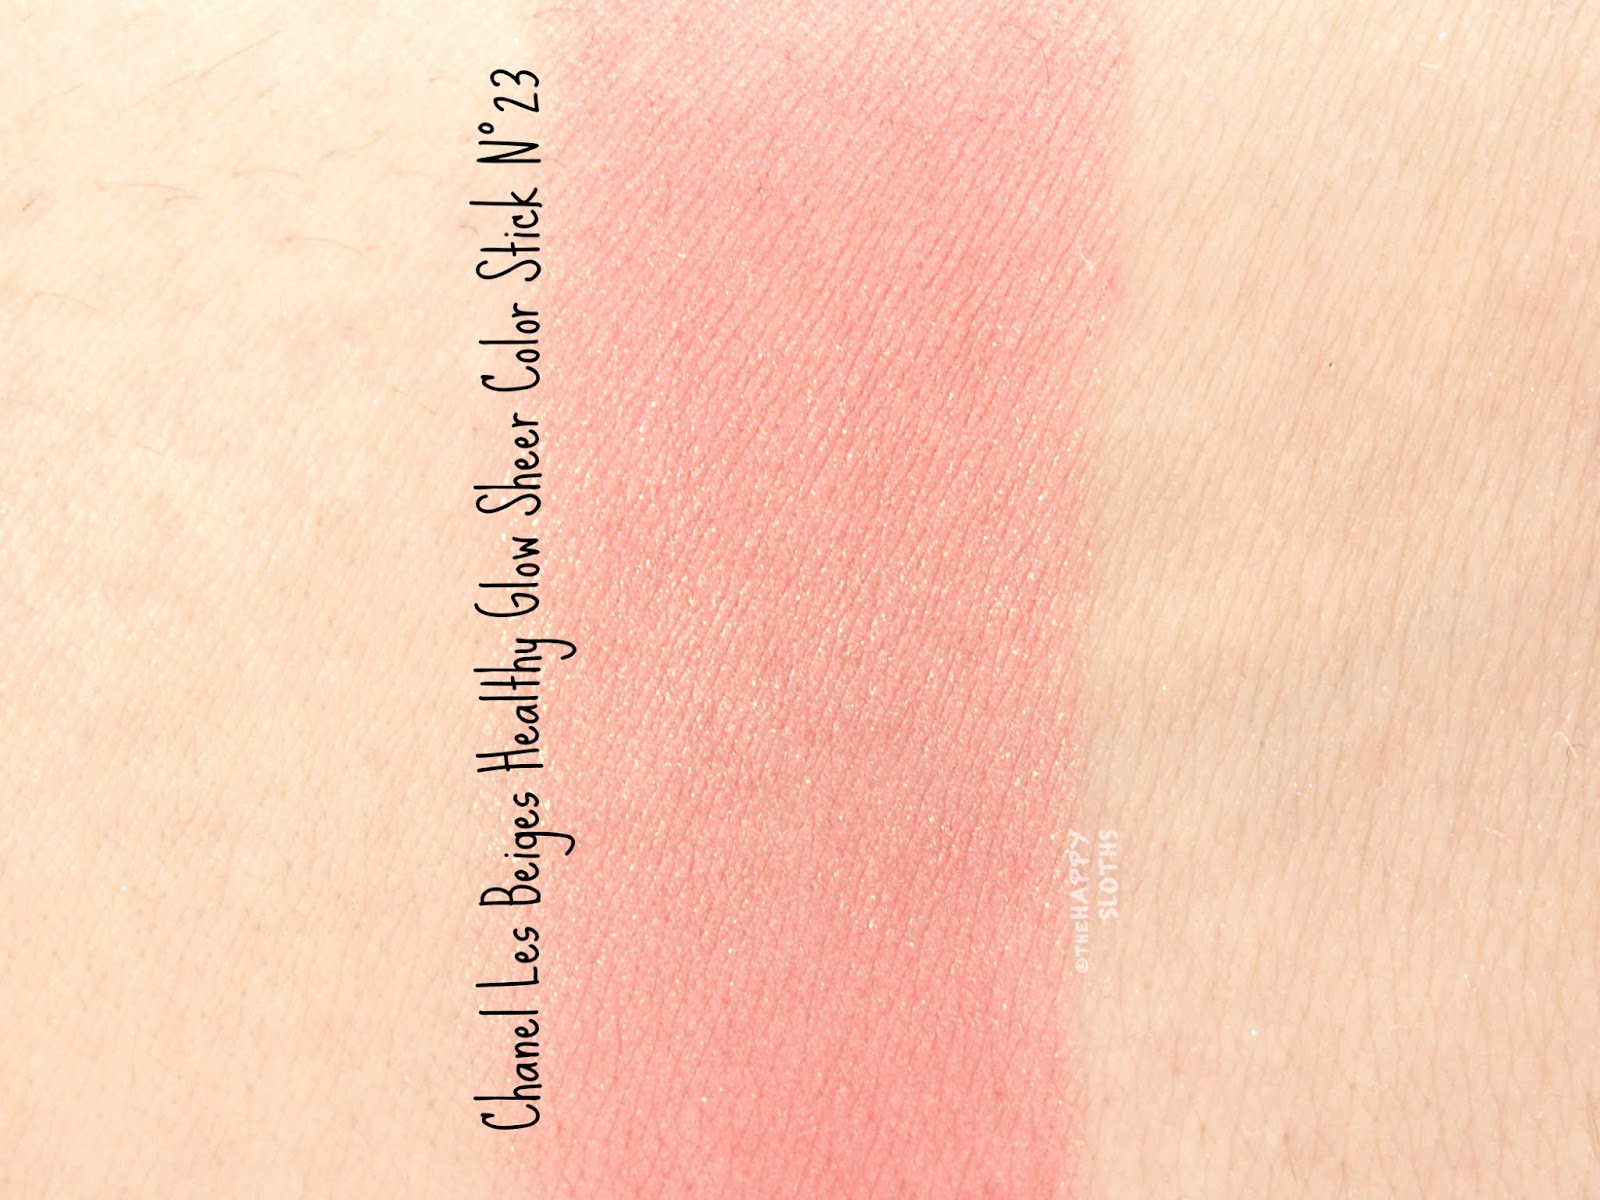 Chanel Les Beiges Healthy Glow Sheer Color Stick "N°23": Review and Swatches